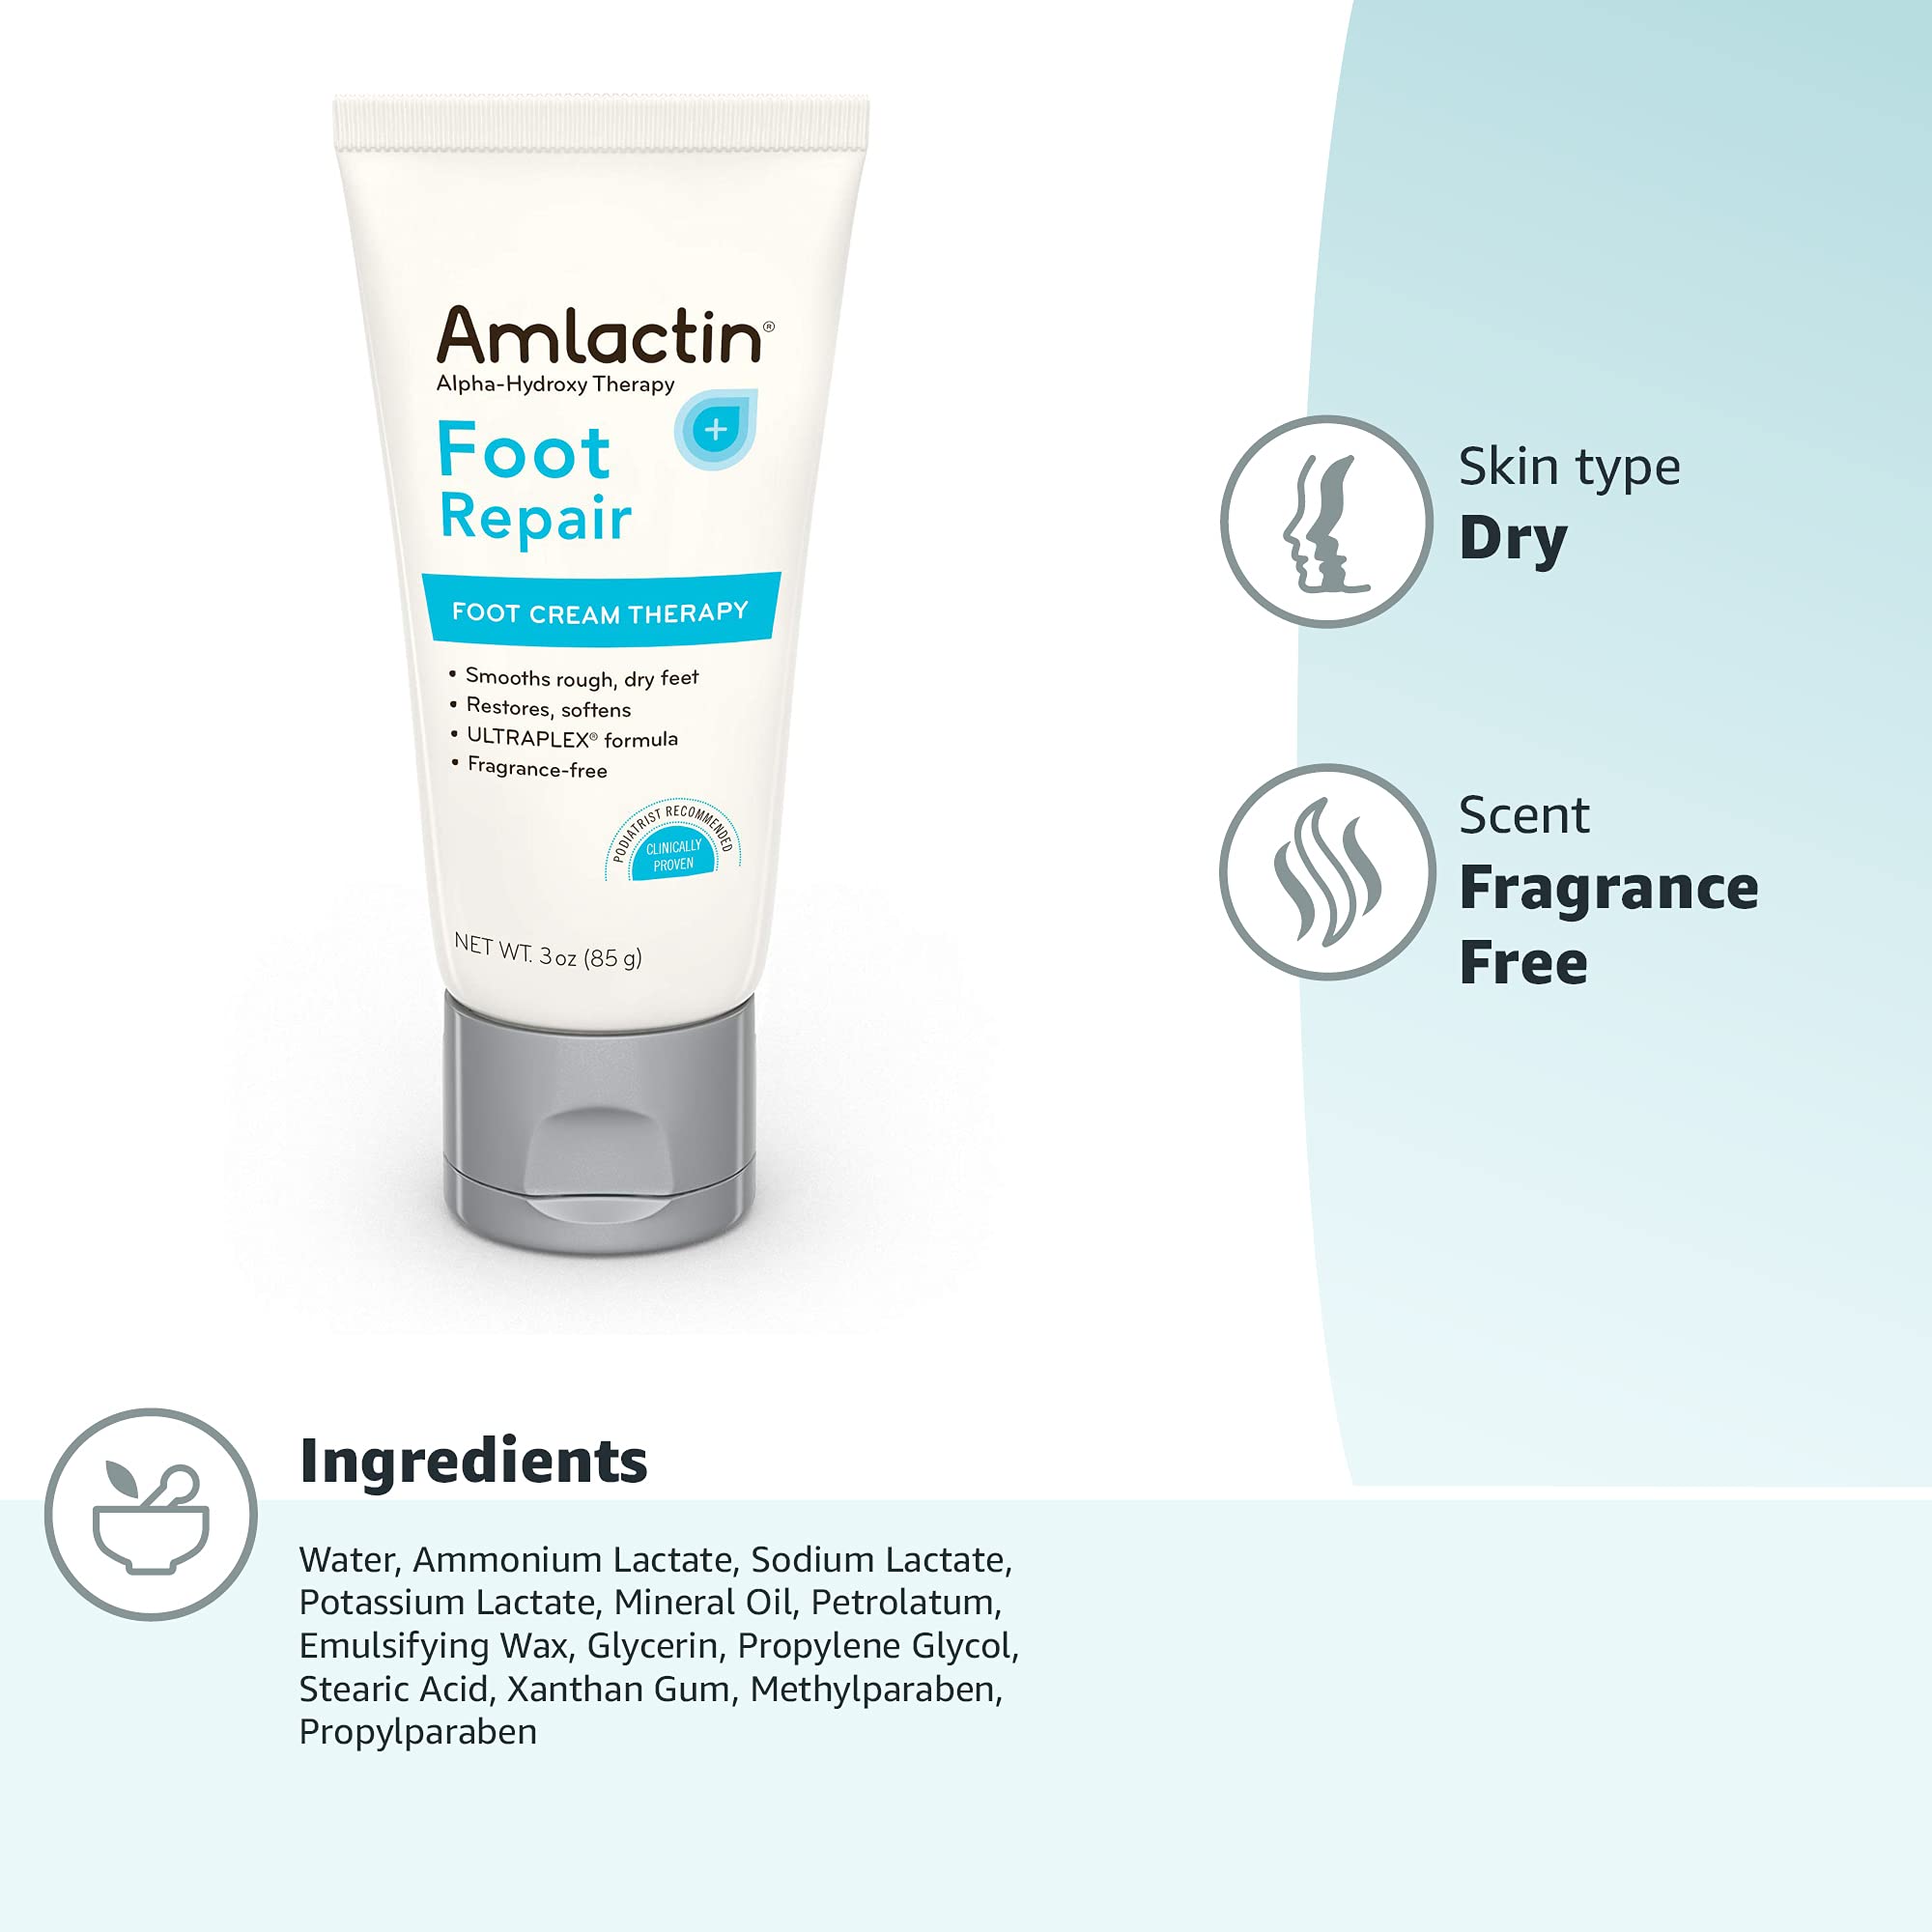 AmLactin Foot Repair Cream - 3 oz Foot Cream with 15% Lactic Acid - Exfoliator and Moisturizer for Dry Skin & Foot Care (Packaging May Vary)